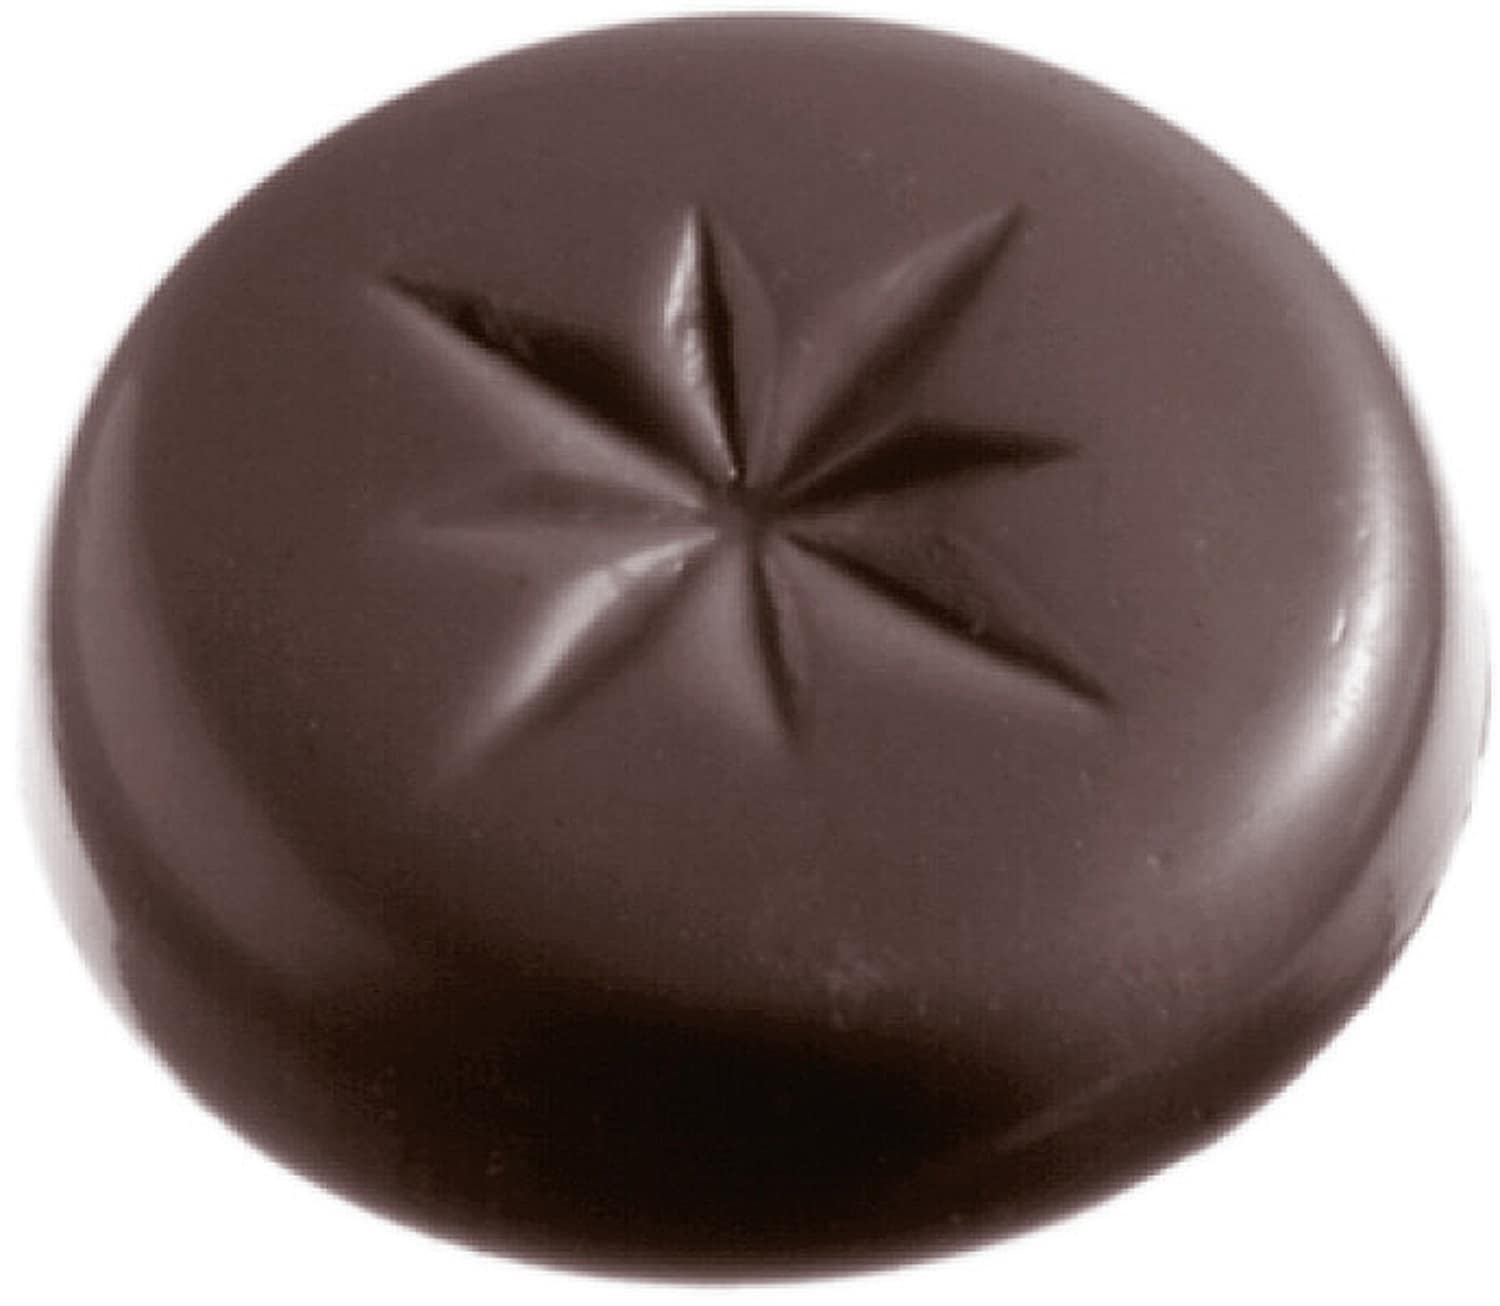 Chocolate mould "Biscuit" 421357